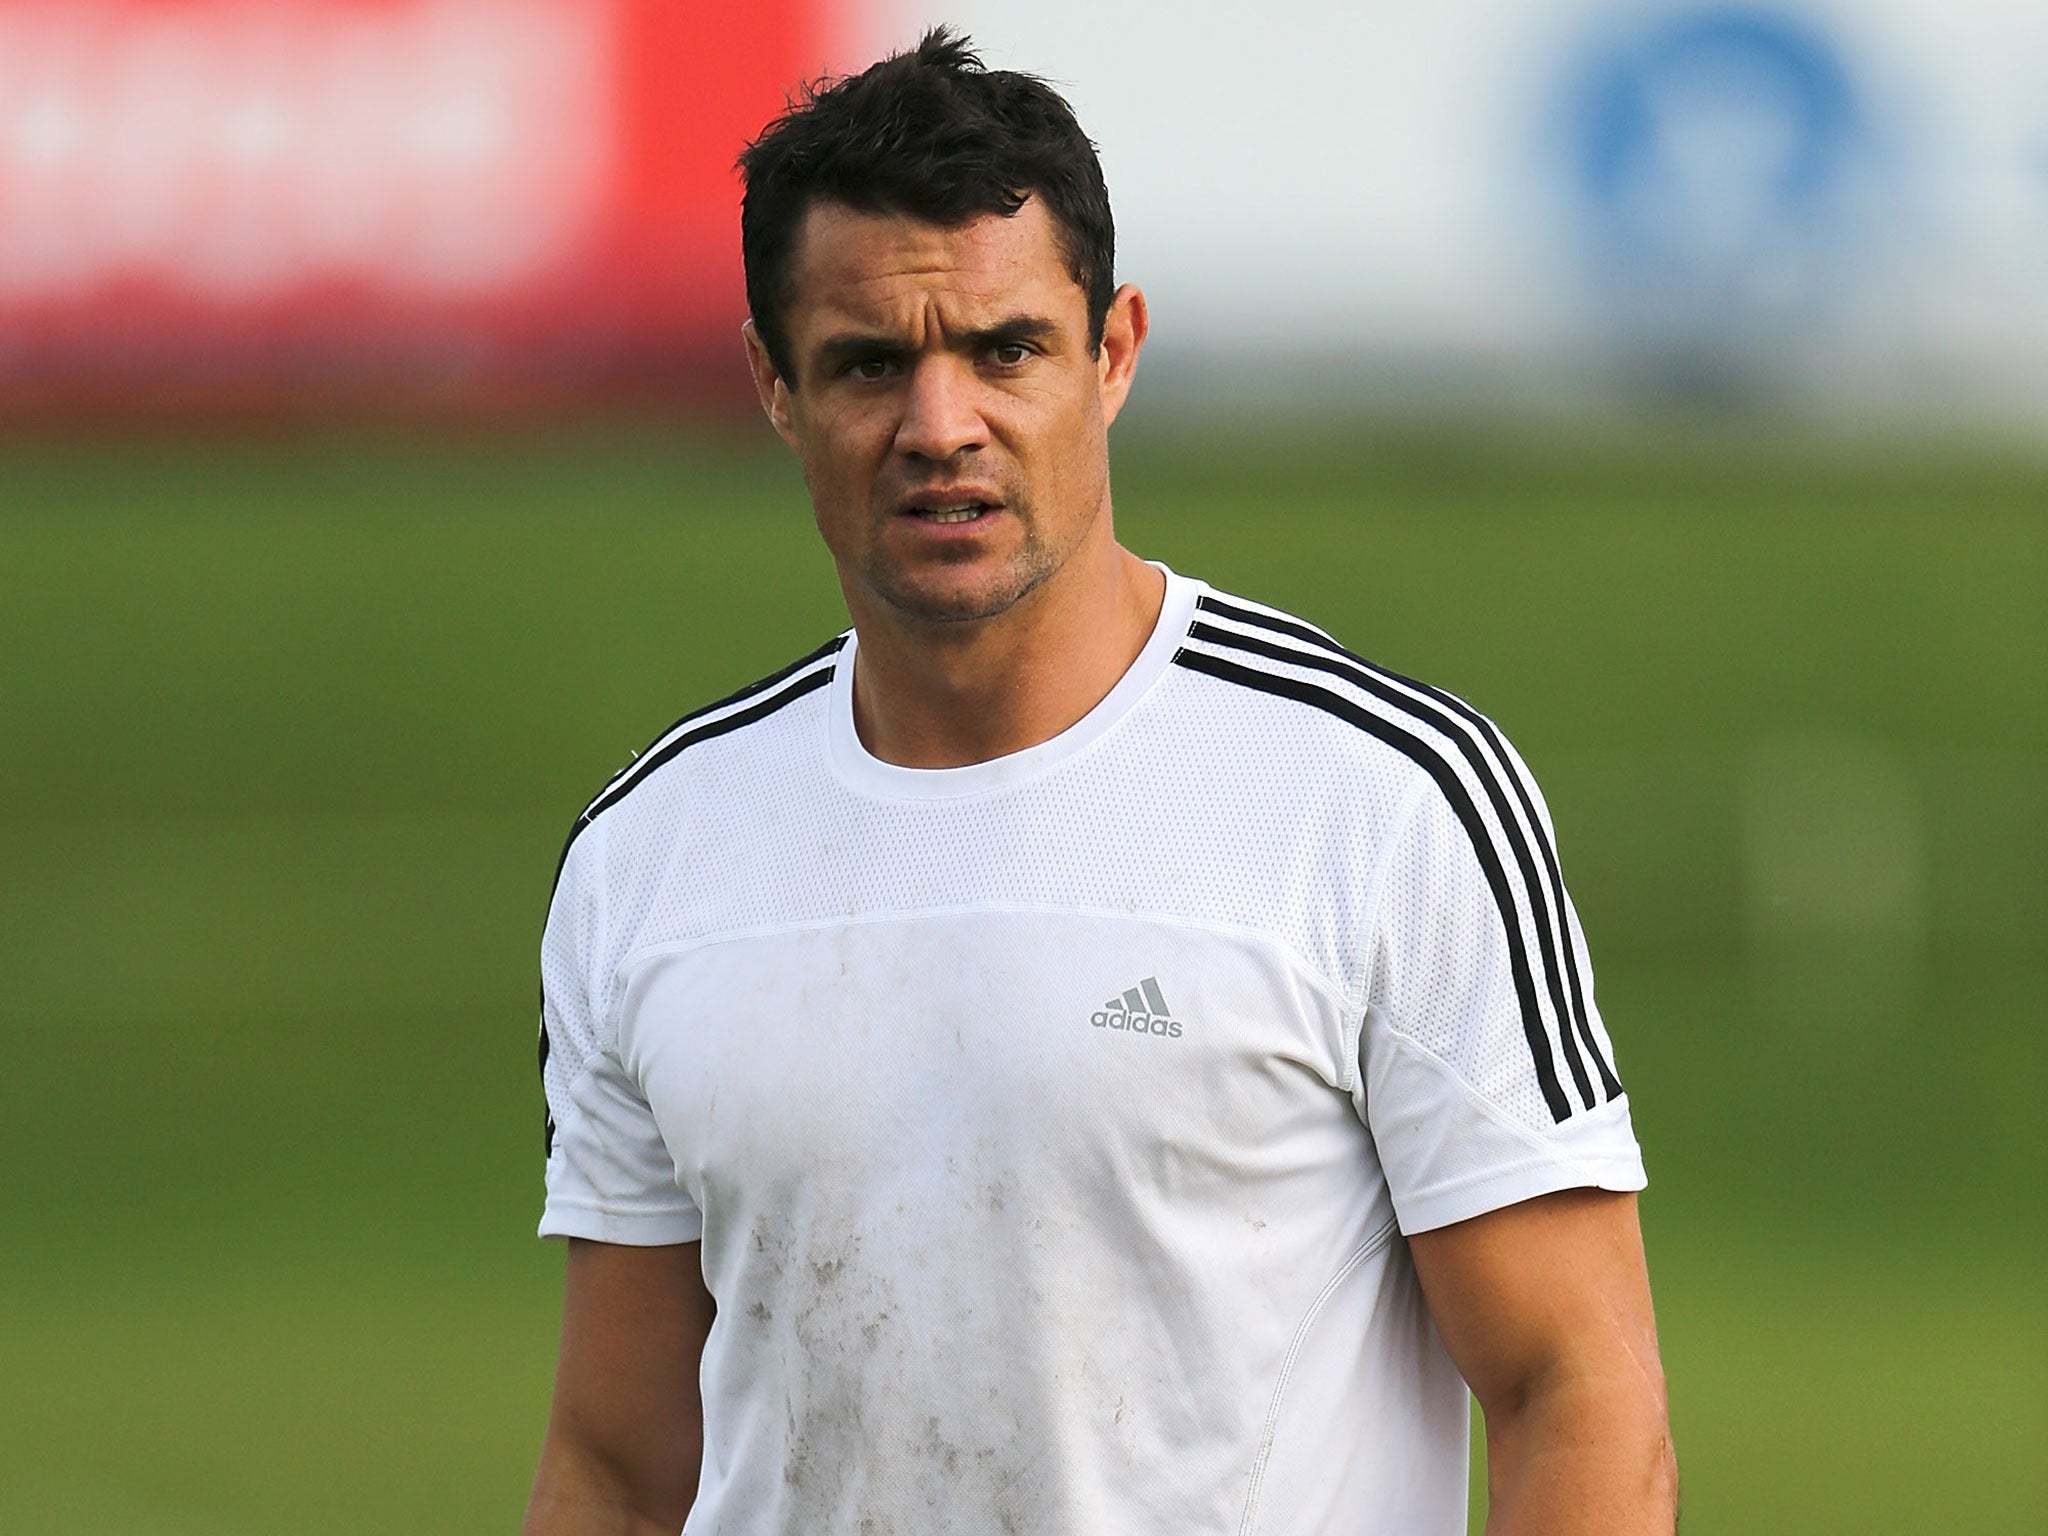 Dan Carter is to return from his six-month sabbatical this Saturday in a New Zealand provincial match